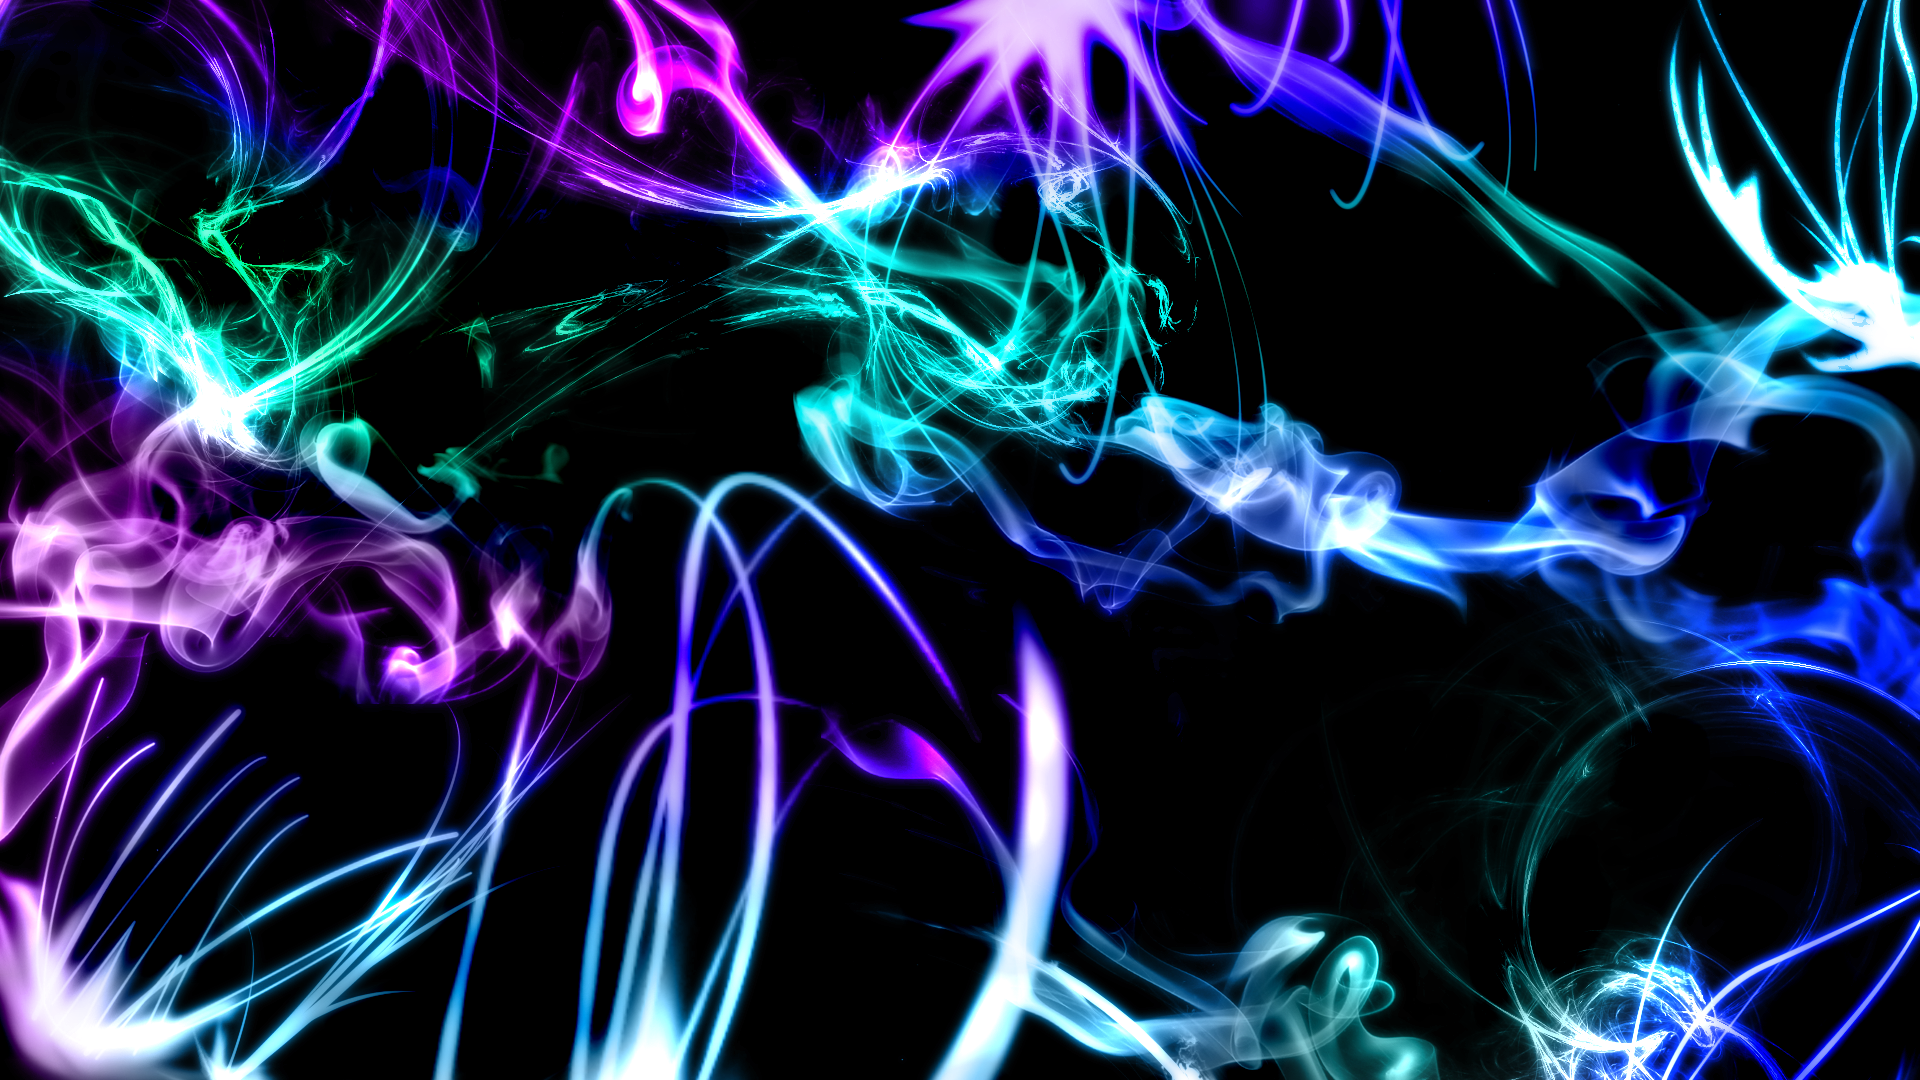 Abstract Wallpaper By Mottl |